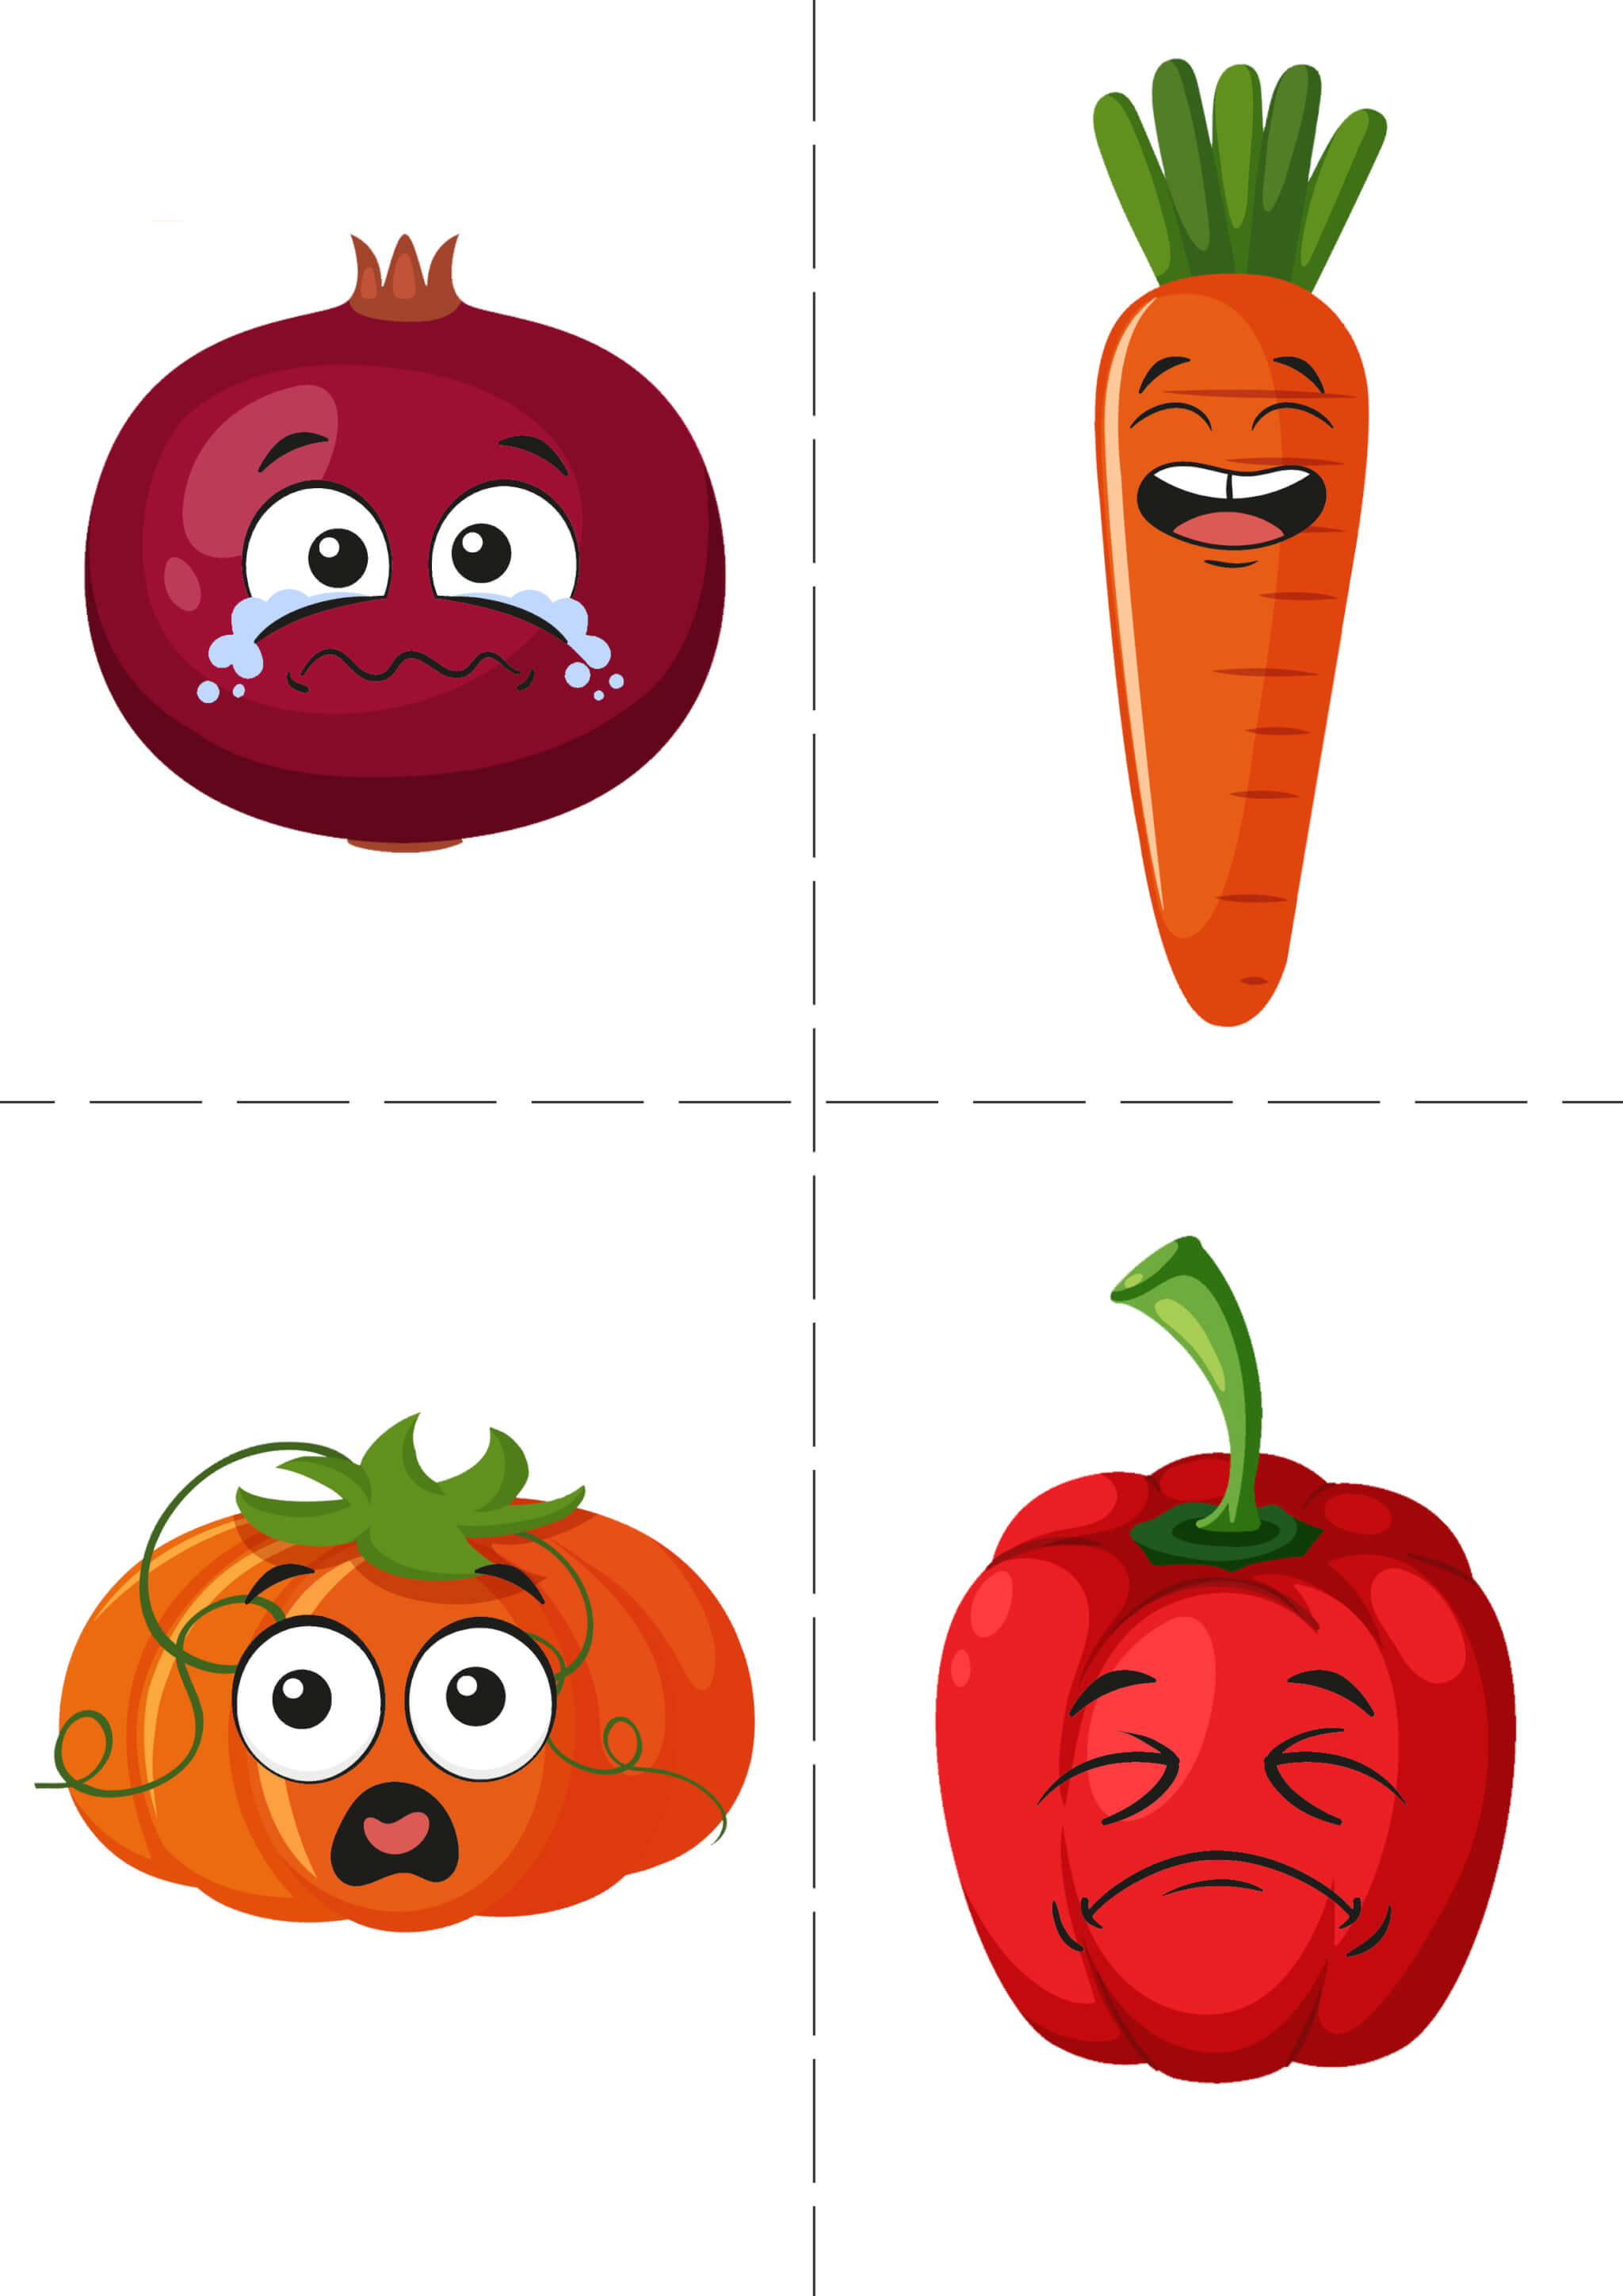 Fruits and Vegetables Emotions Flashcards - Image 4